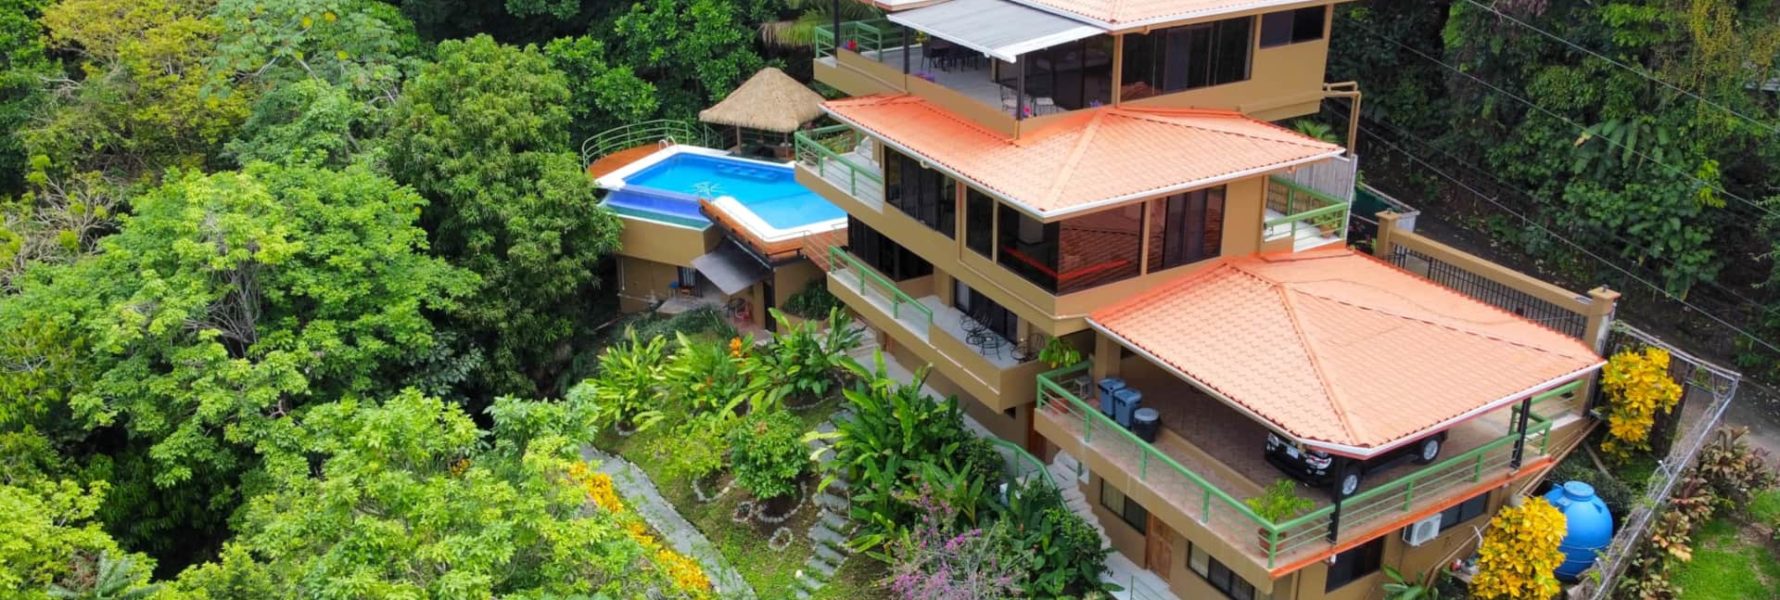 
This stunning Manuel Antonio vacation villa is perched high amidst the jungle canopy, offering a truly immersive experience.